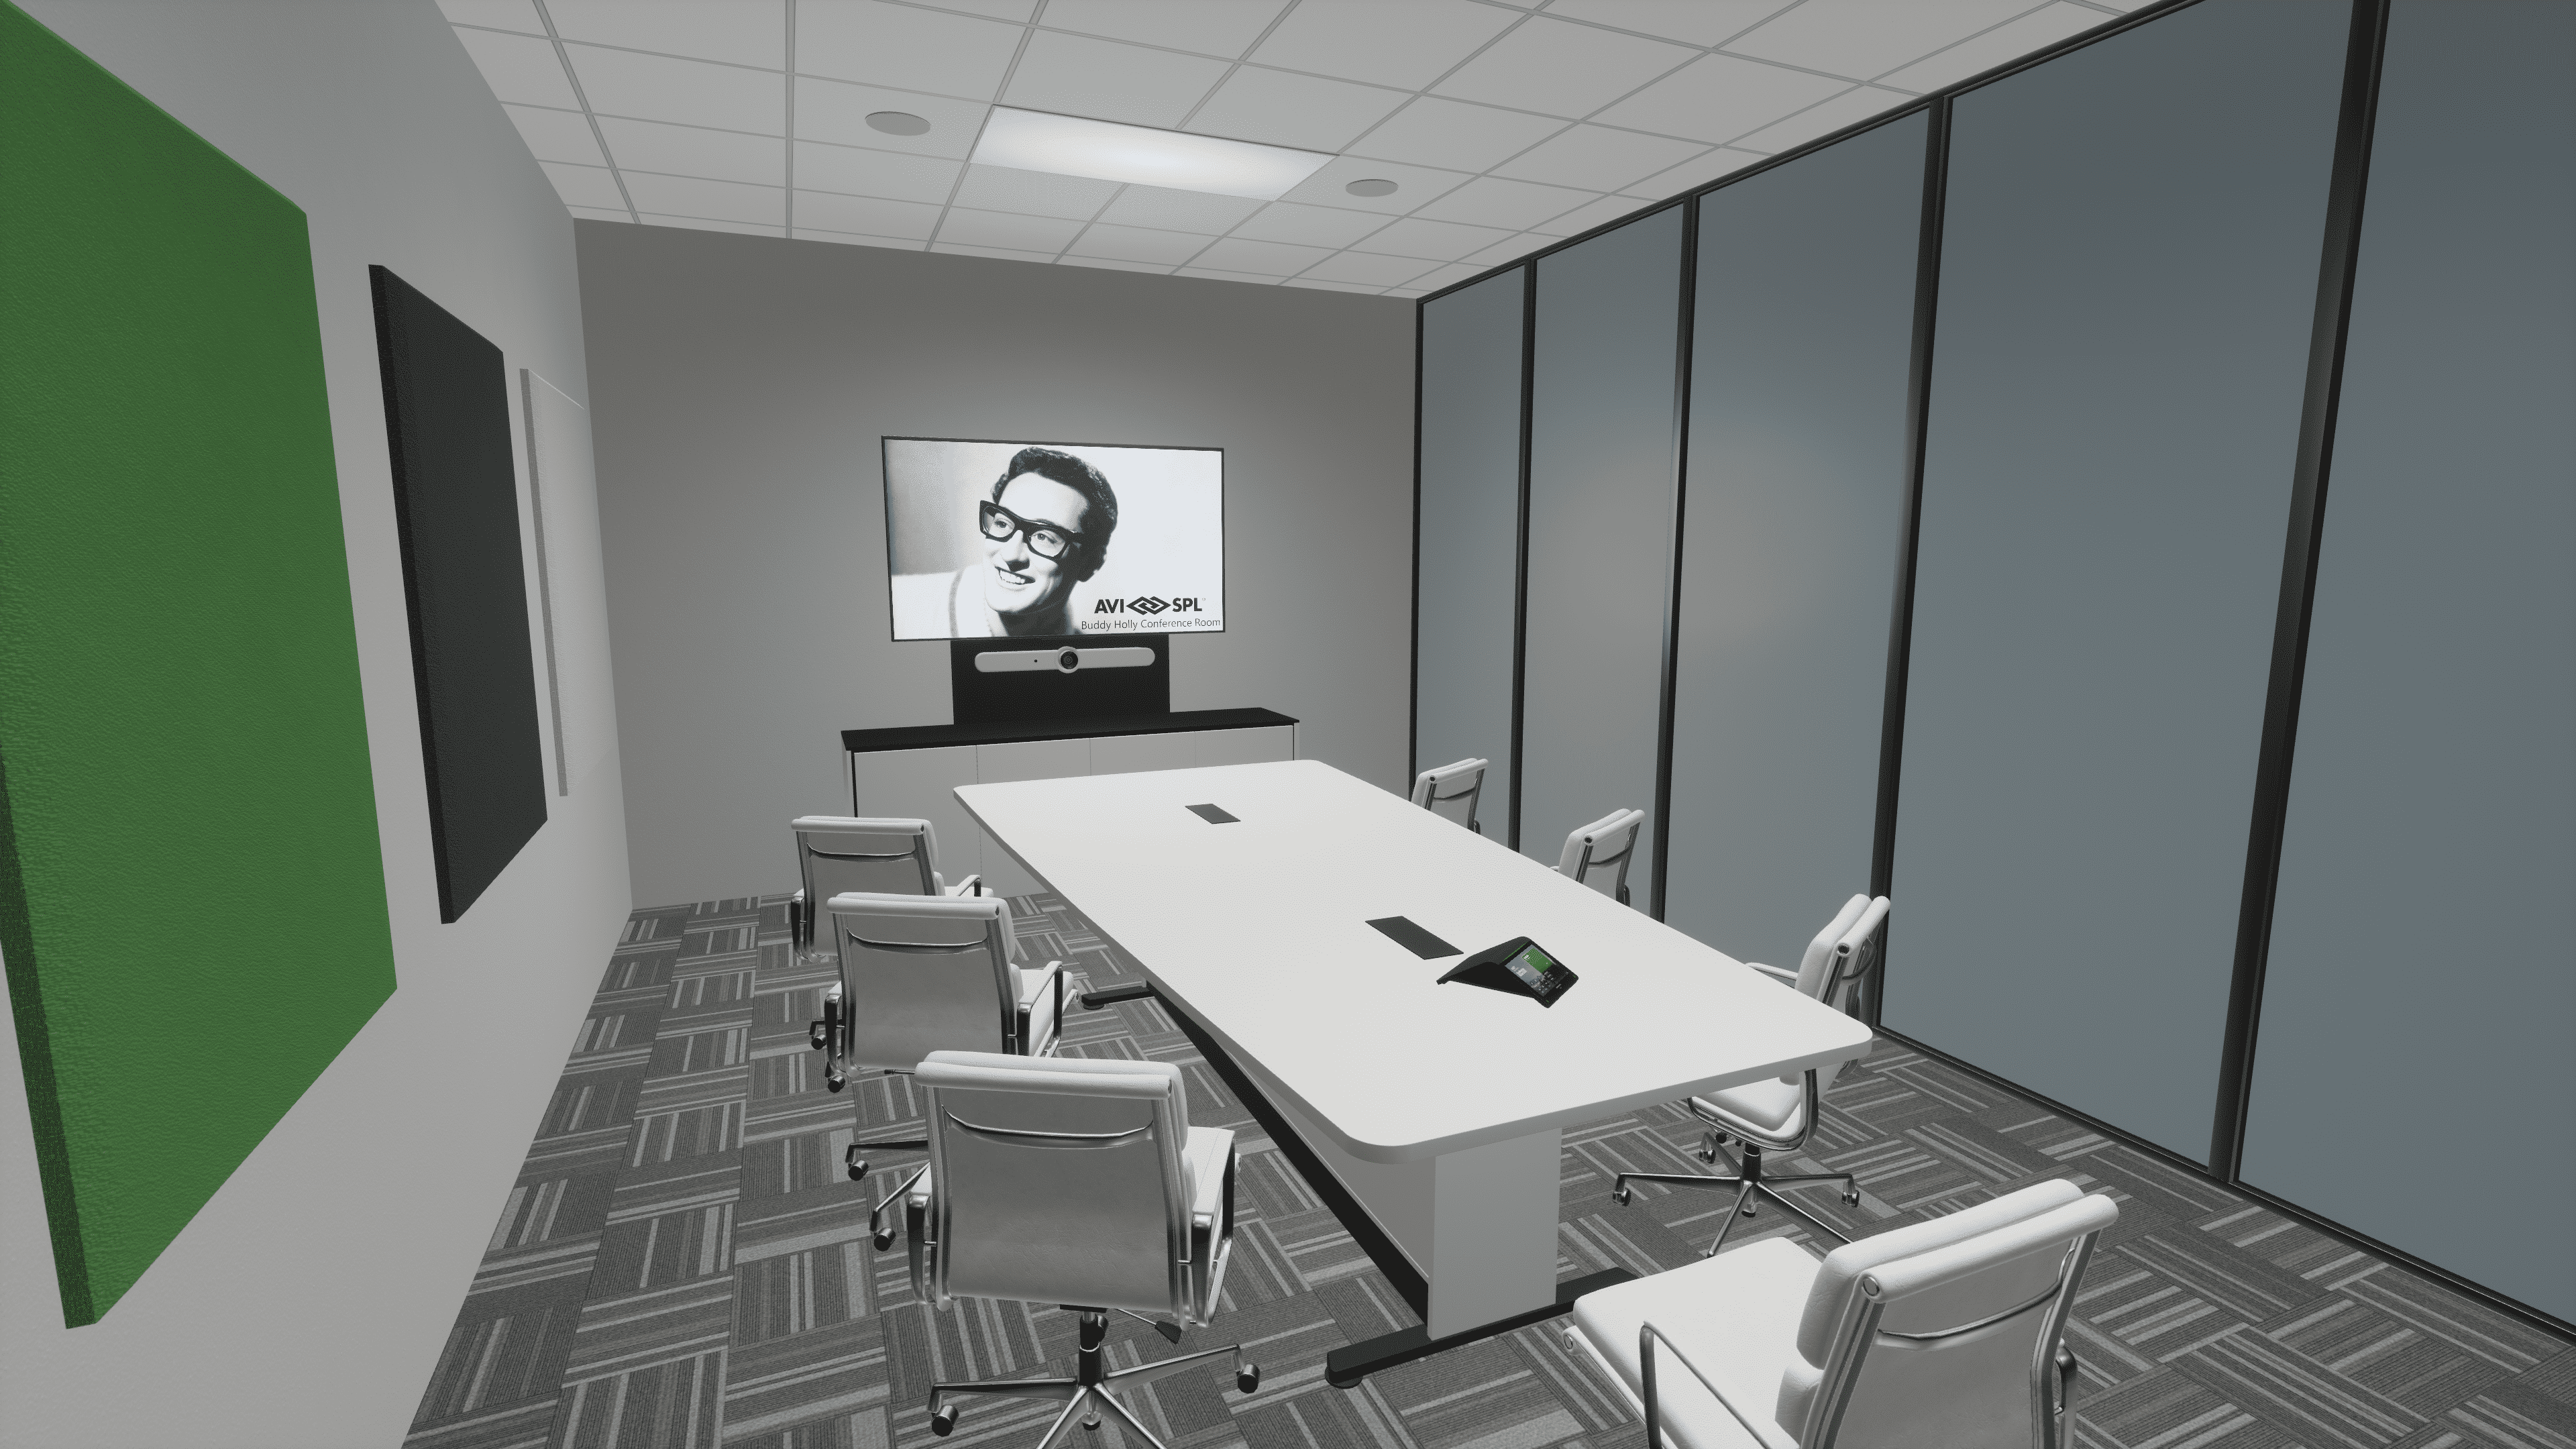 VR reference designs conference room